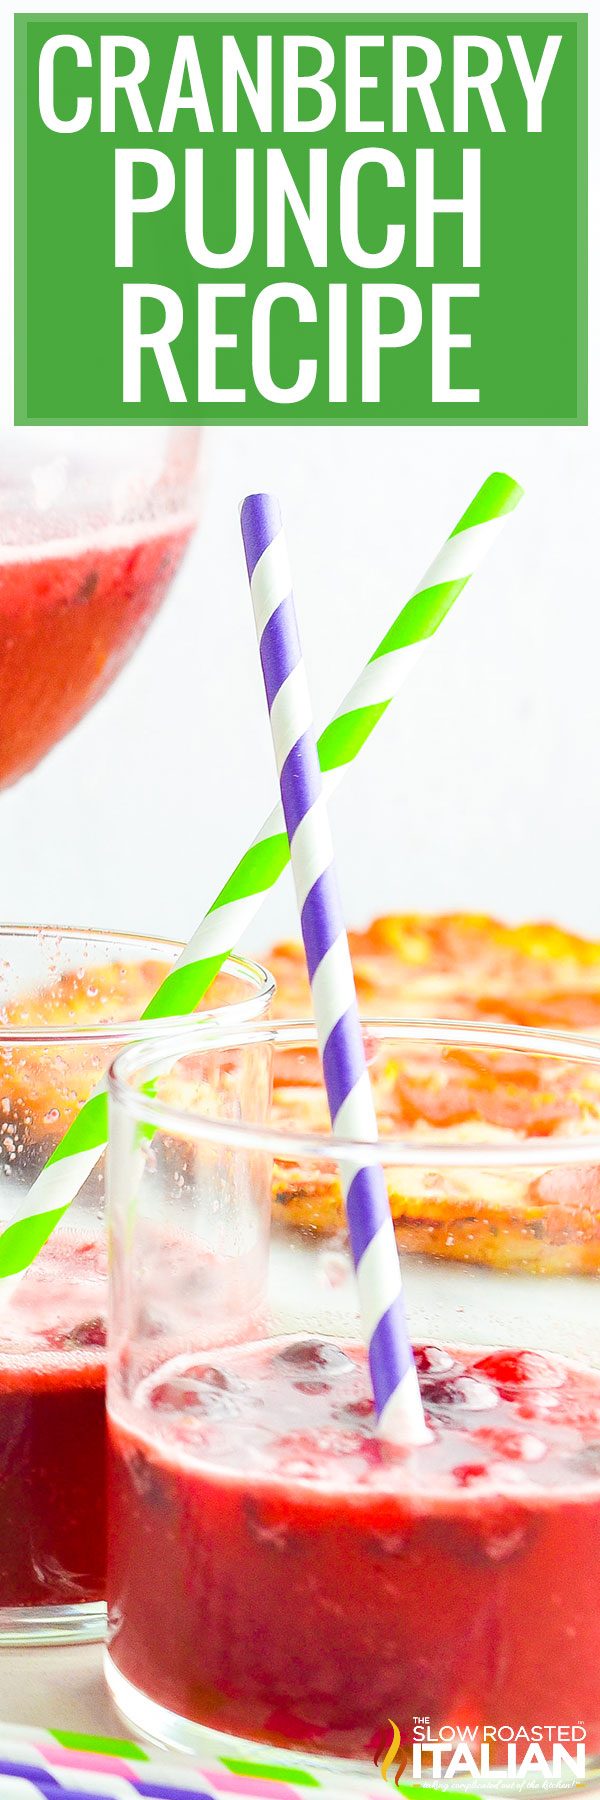 cranberry punch -pin